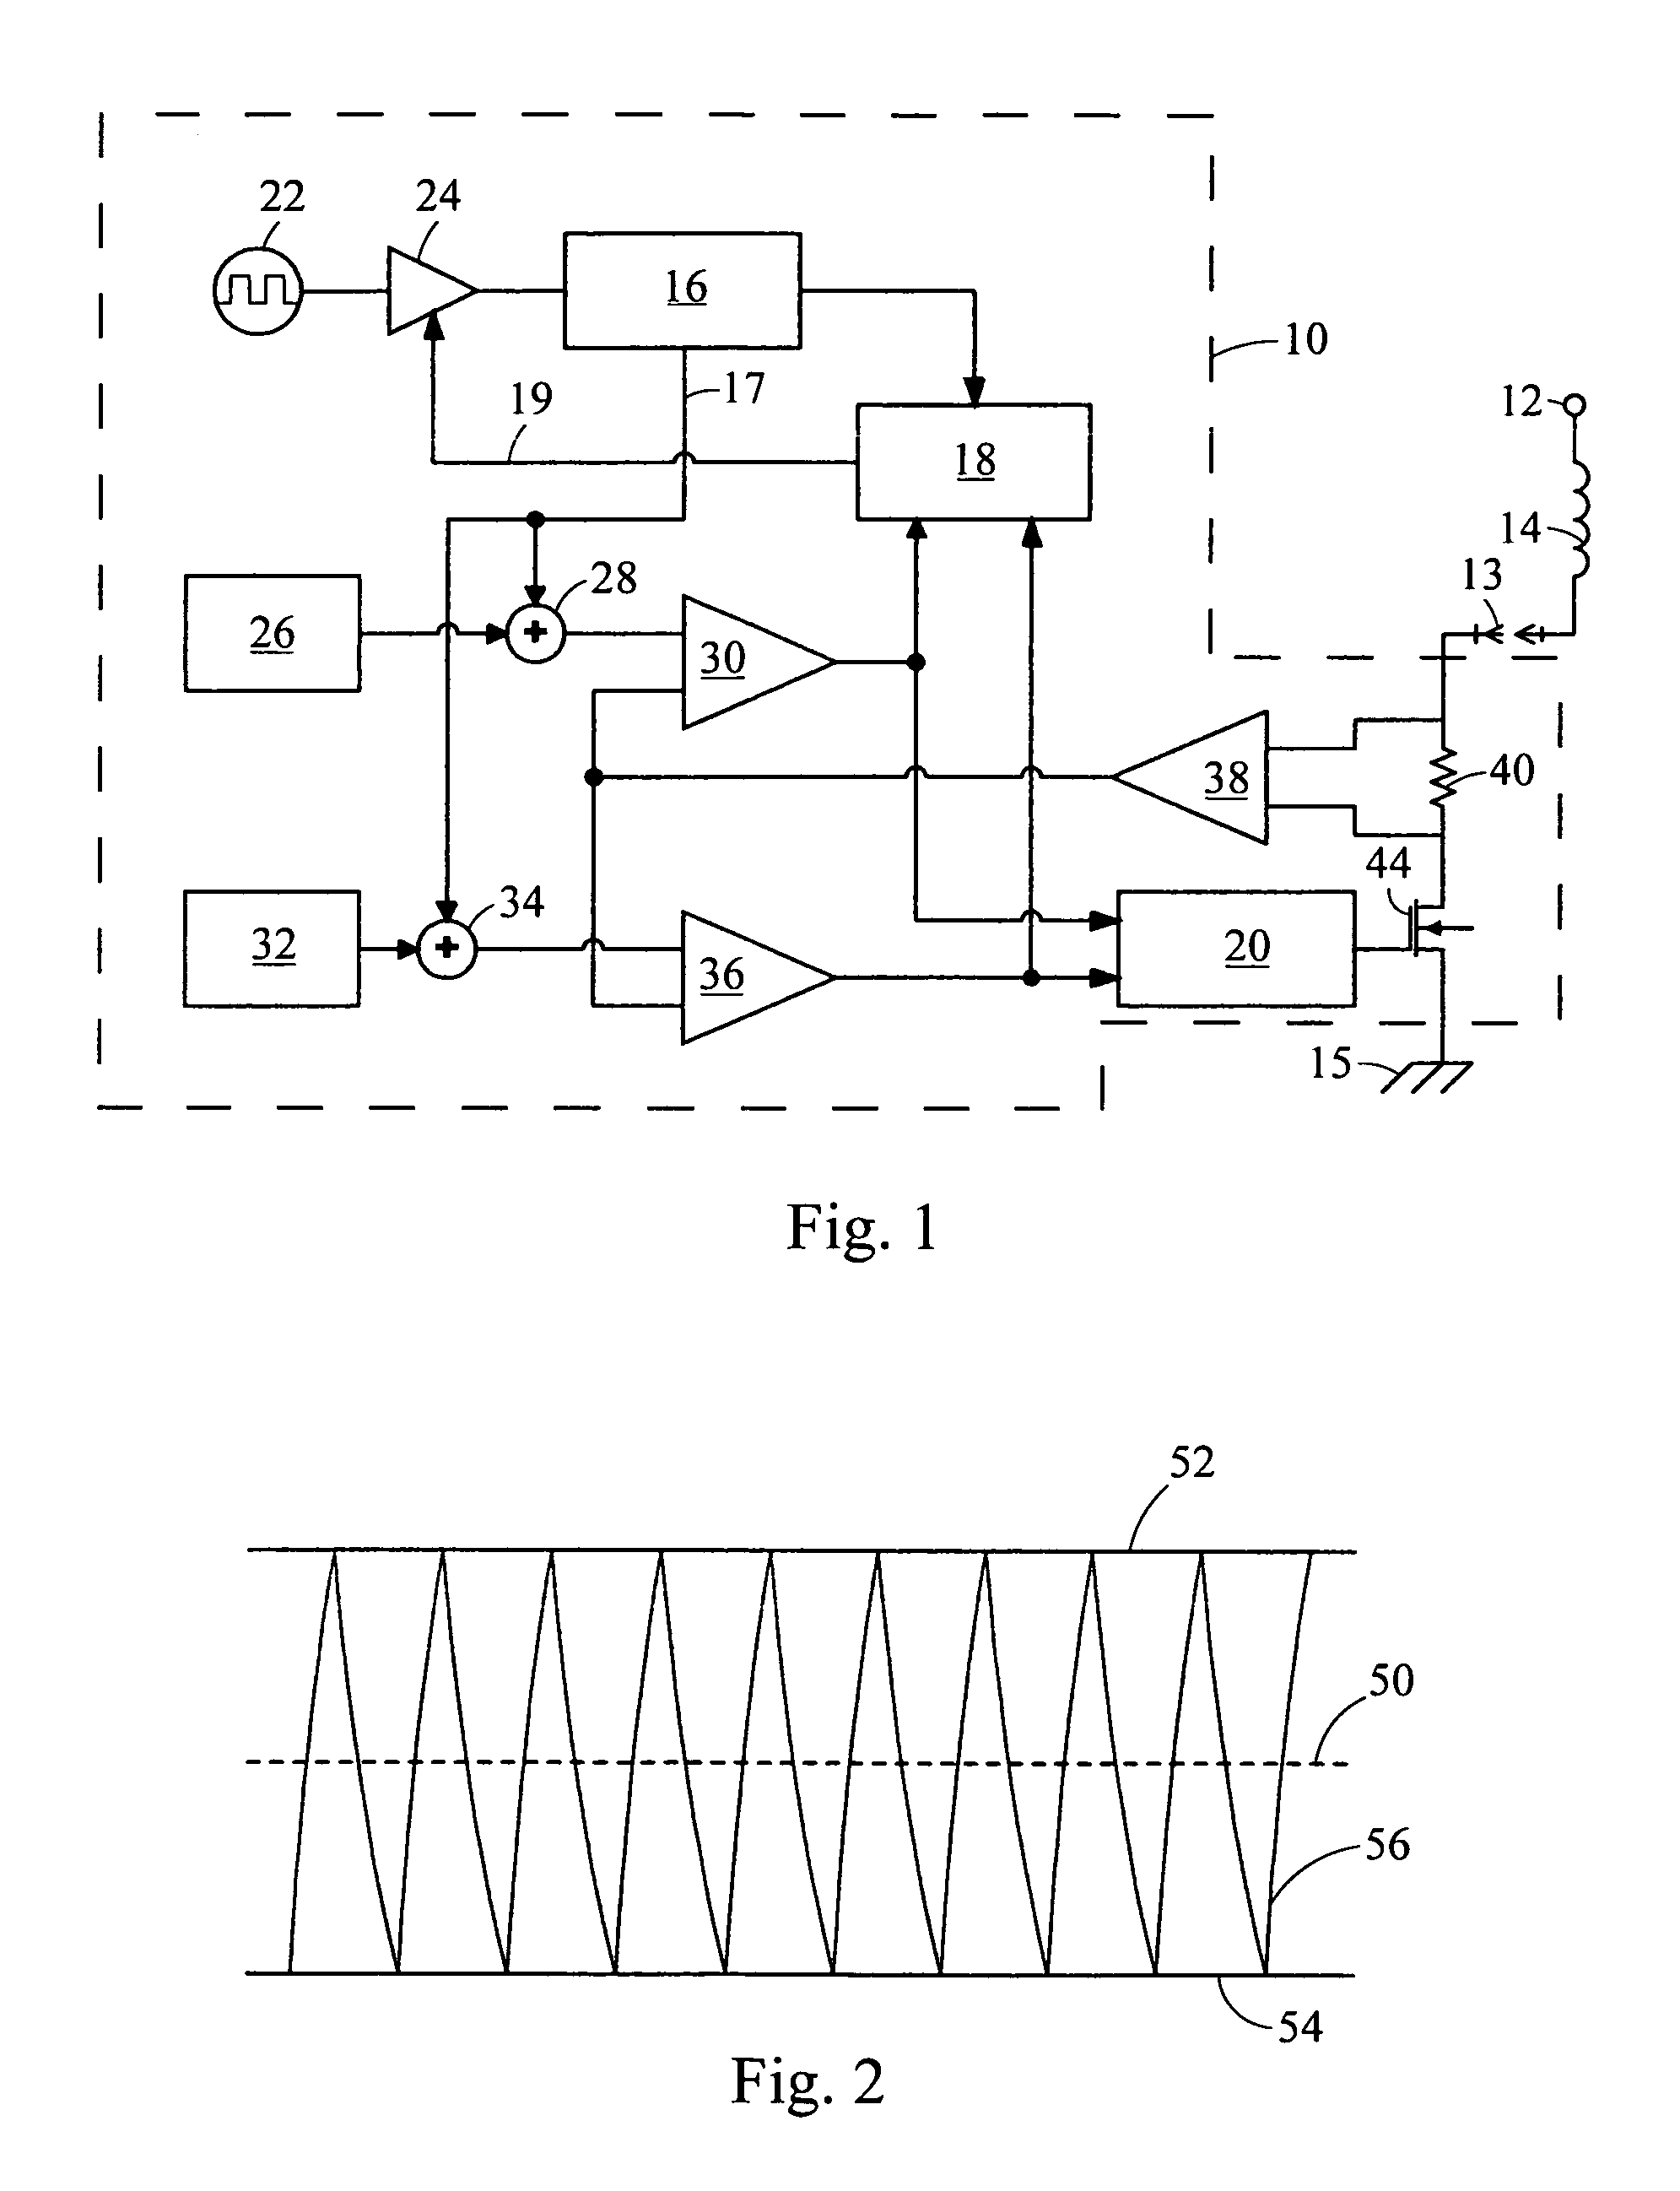 Dither amplitude correction for constant current drivers